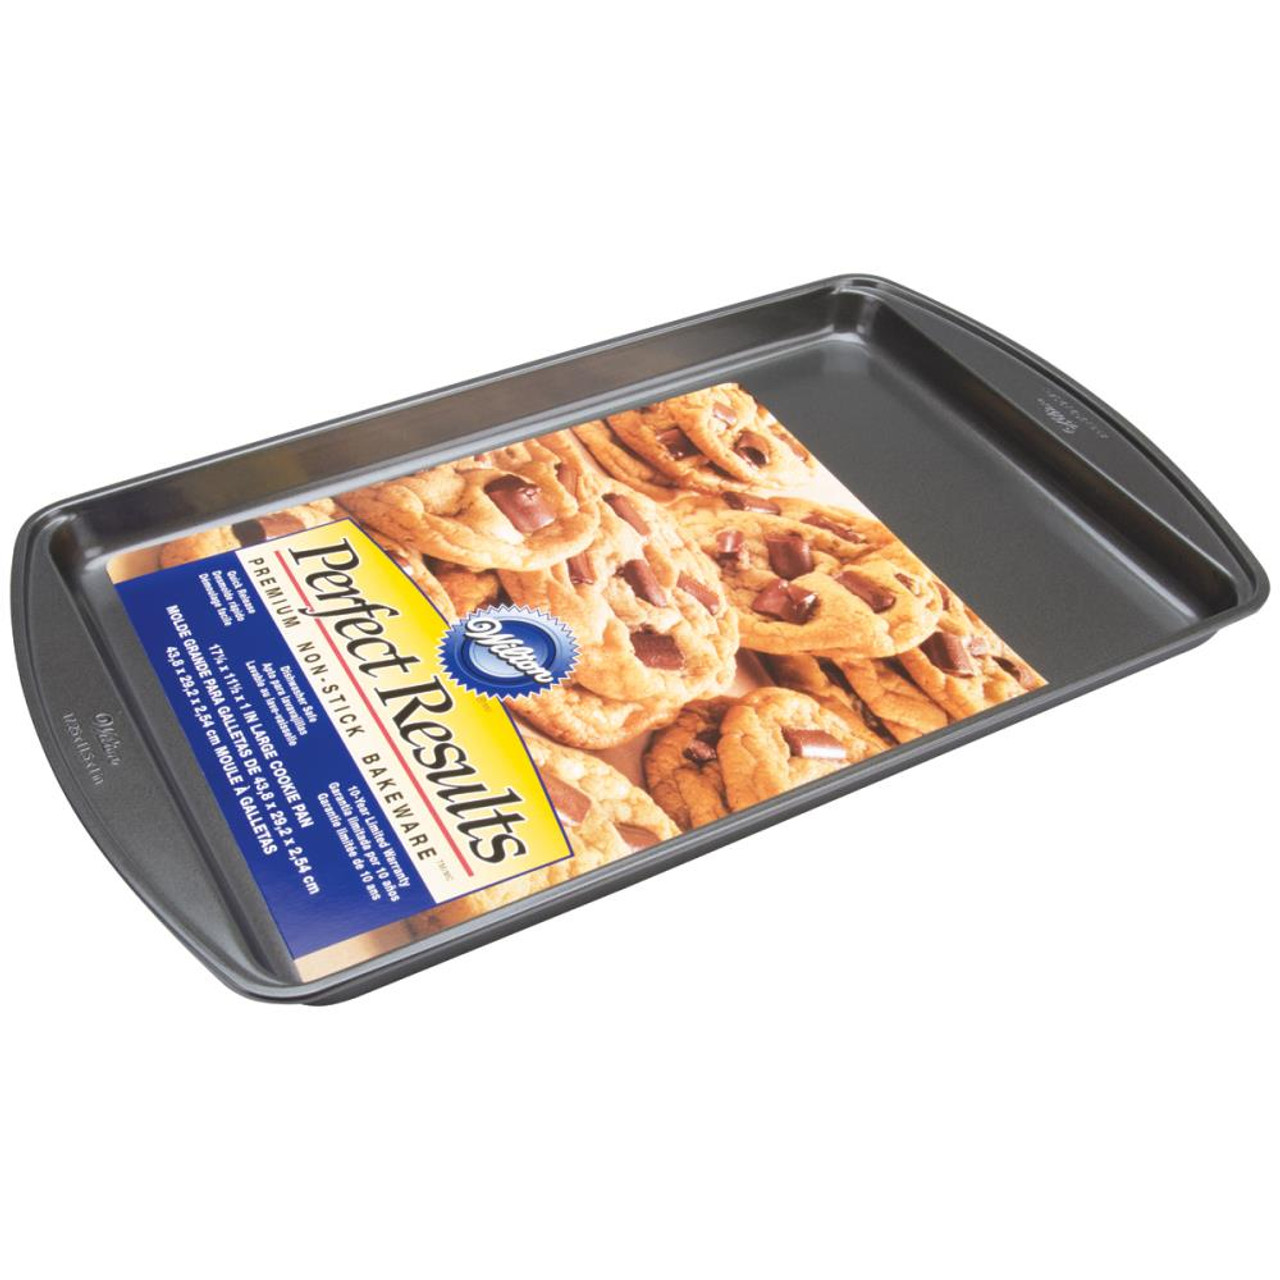 Wilton Perfect Results Mega Cookie Pan, Silver